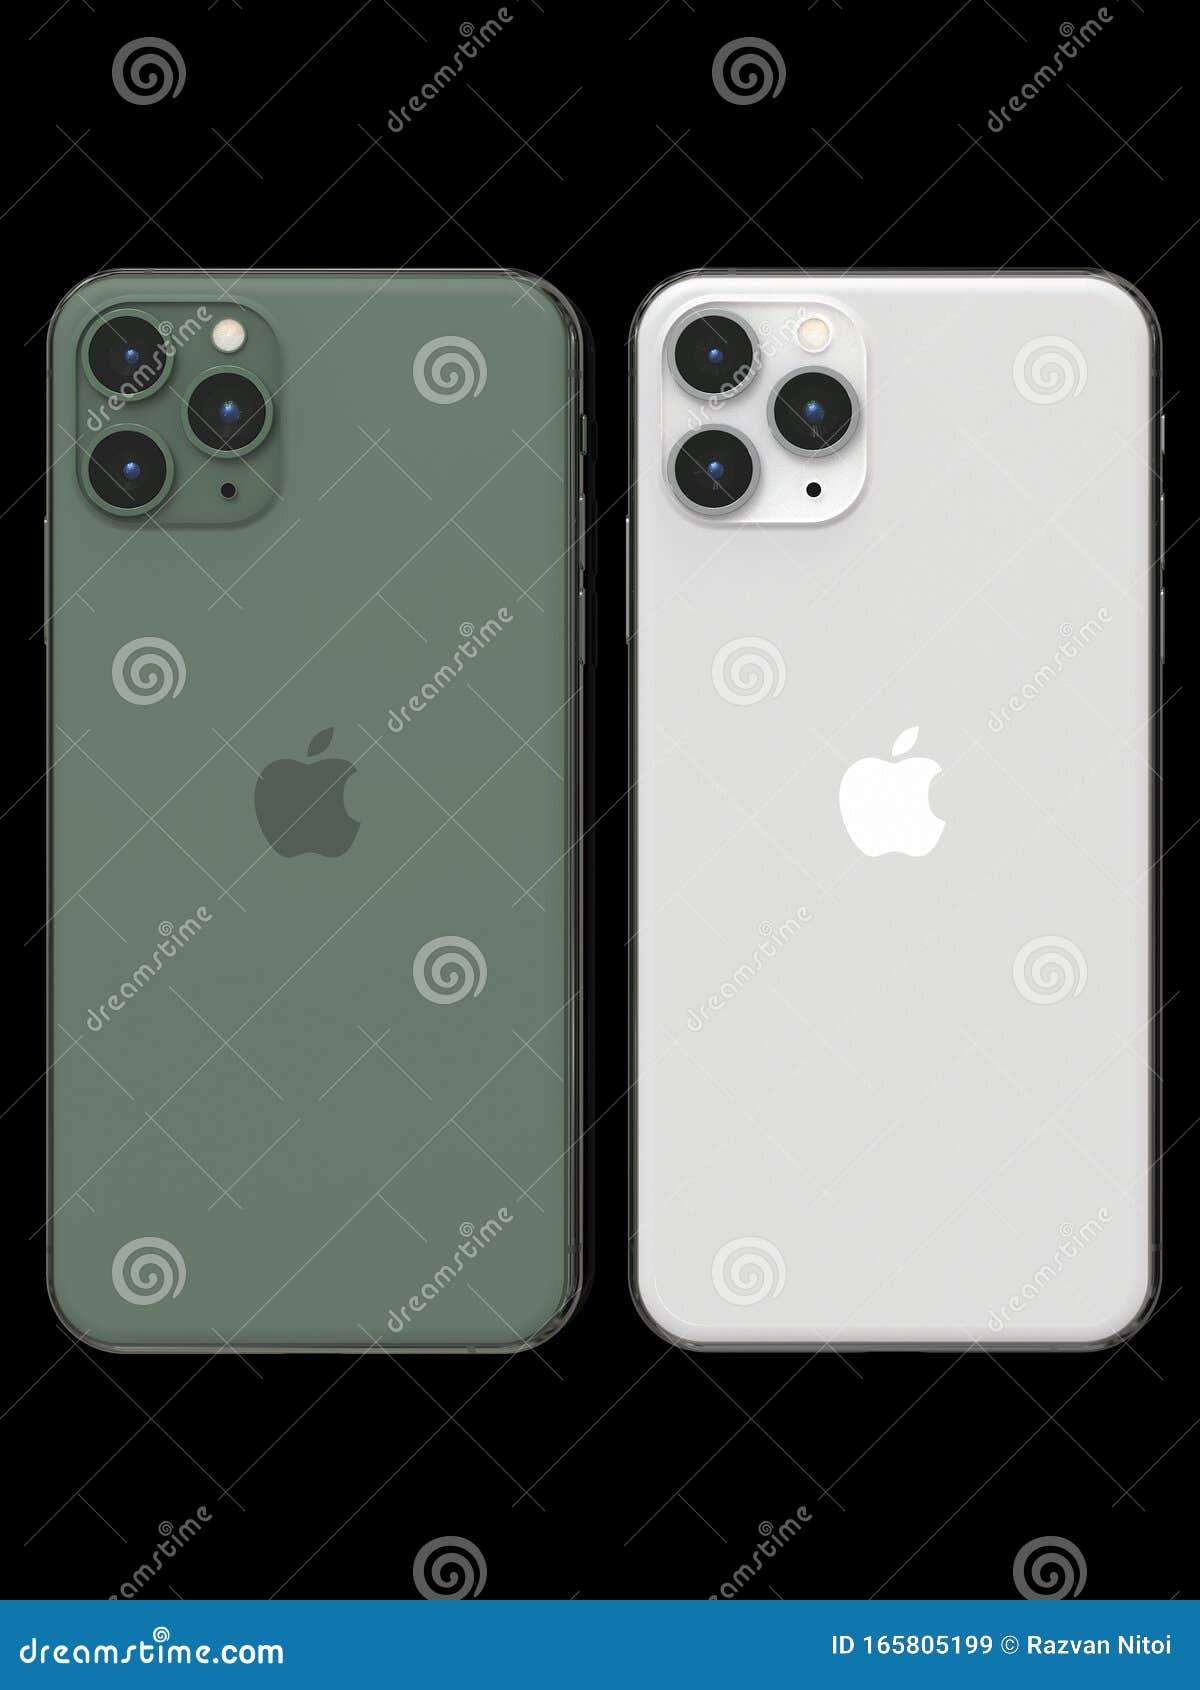 Apple Iphone 11 Pro 2 Colors Compared Side By Side Editorial